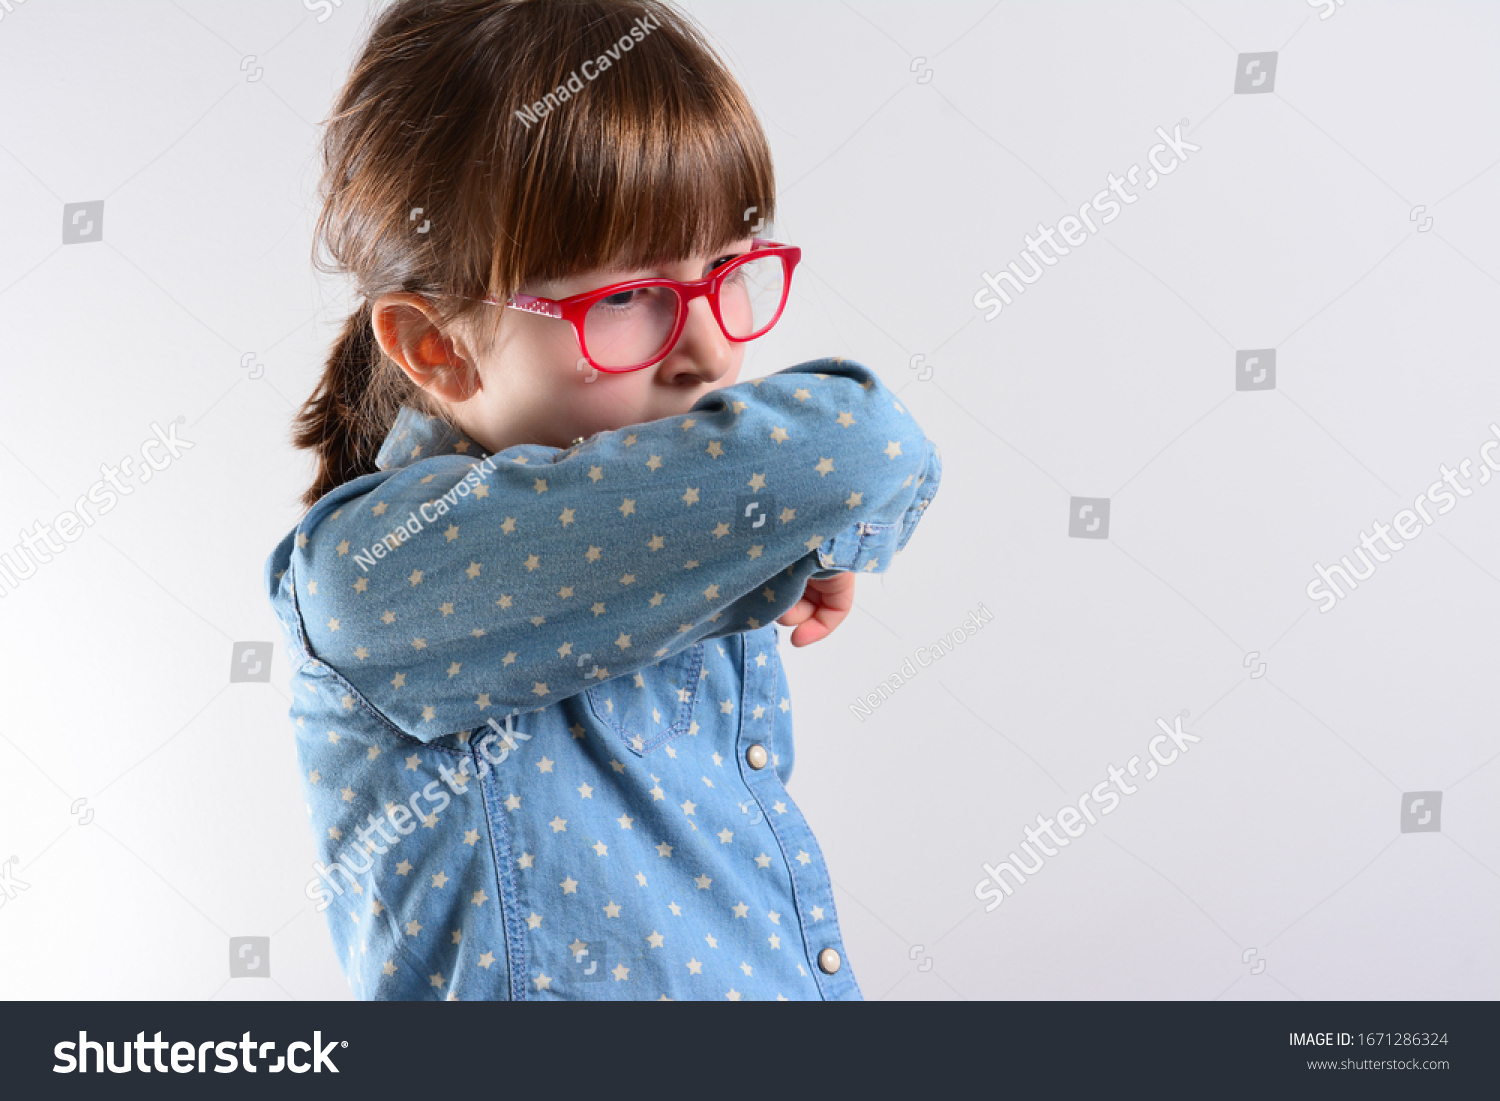 Unhappy kid Cough into her elbow, not her hand. Small girl pull the collar of her T-shirt up to cover mouth when coughing. Coughing advice from experts who seek to minimize risk of viral transmission #1671286324